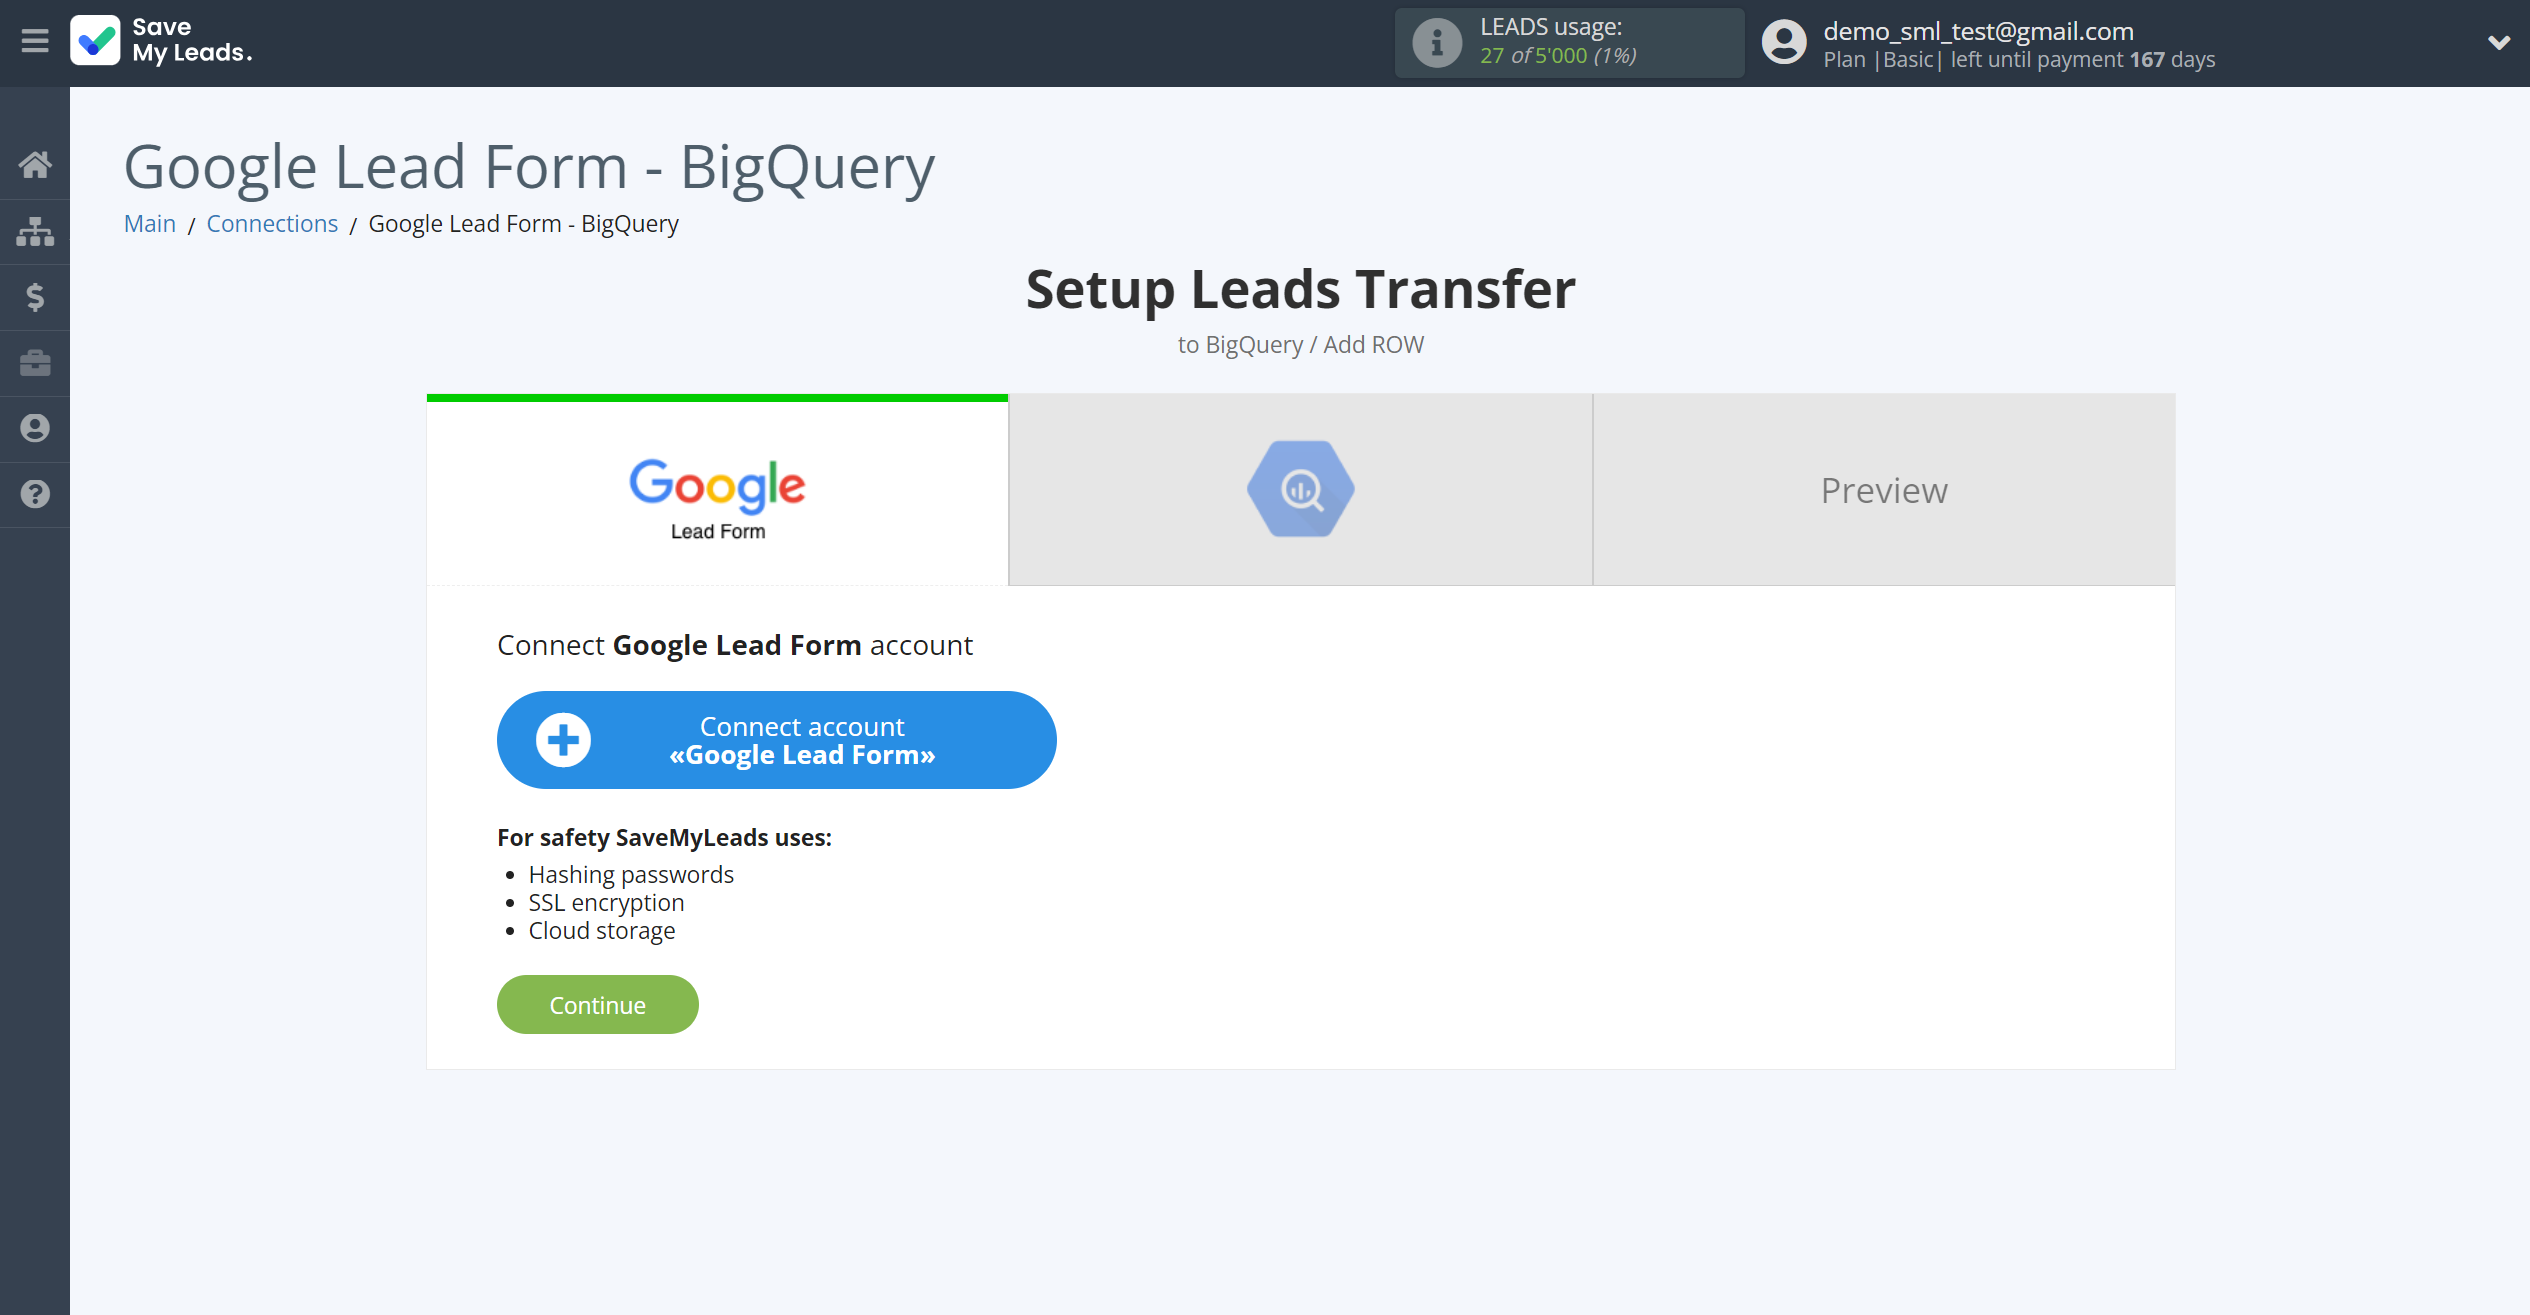 How to Connect Google Lead Form with BigQuery | Data Source account